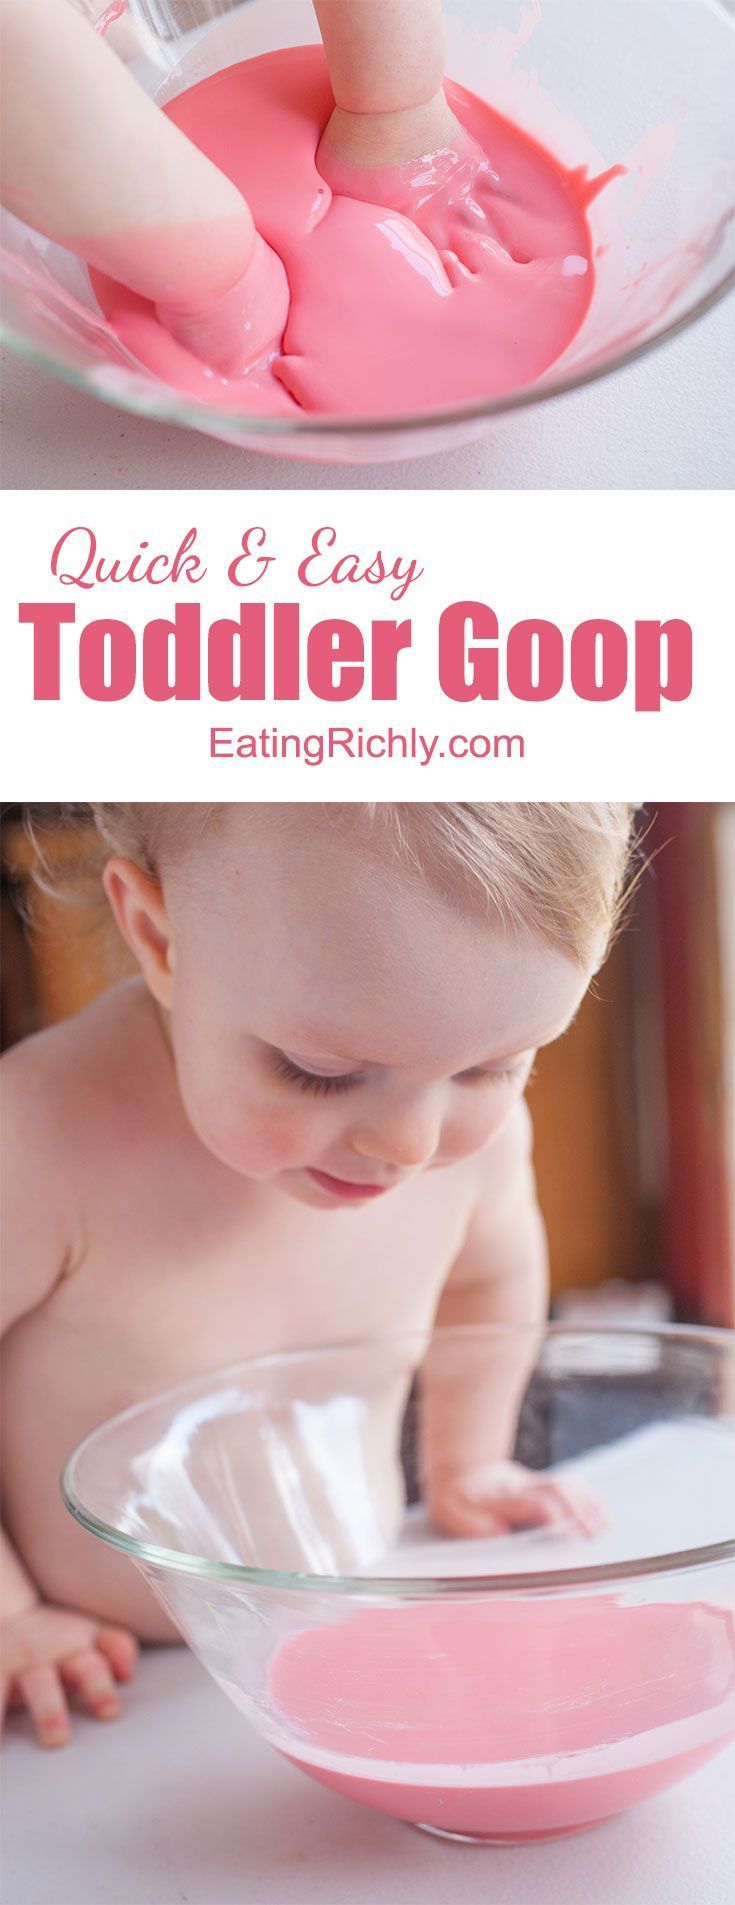 Kids of all ages love making, and playing with, this easy goo recipe. Moms love that it's completely safe for even the youngest toddlers! From EatingRichly.com -   25 diy for toddlers
 ideas